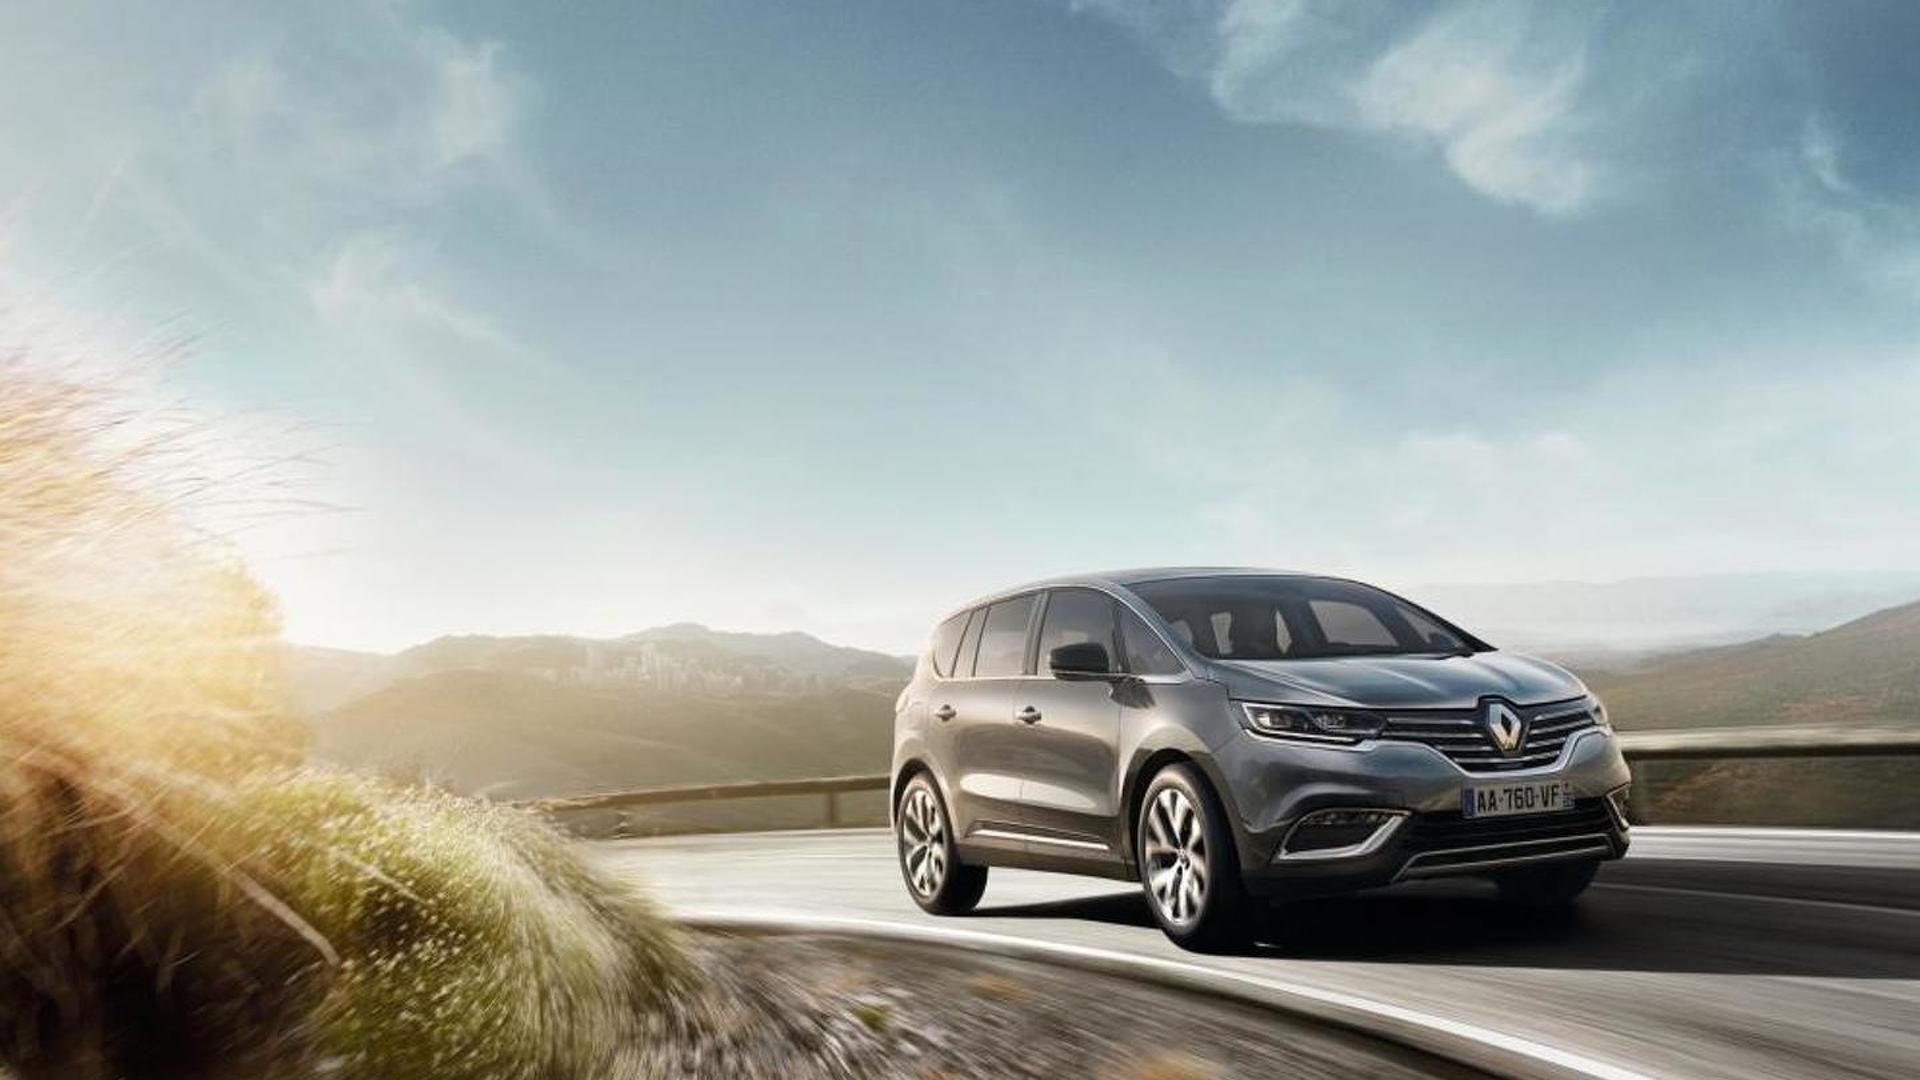 Renault fights back against claims the Espace 